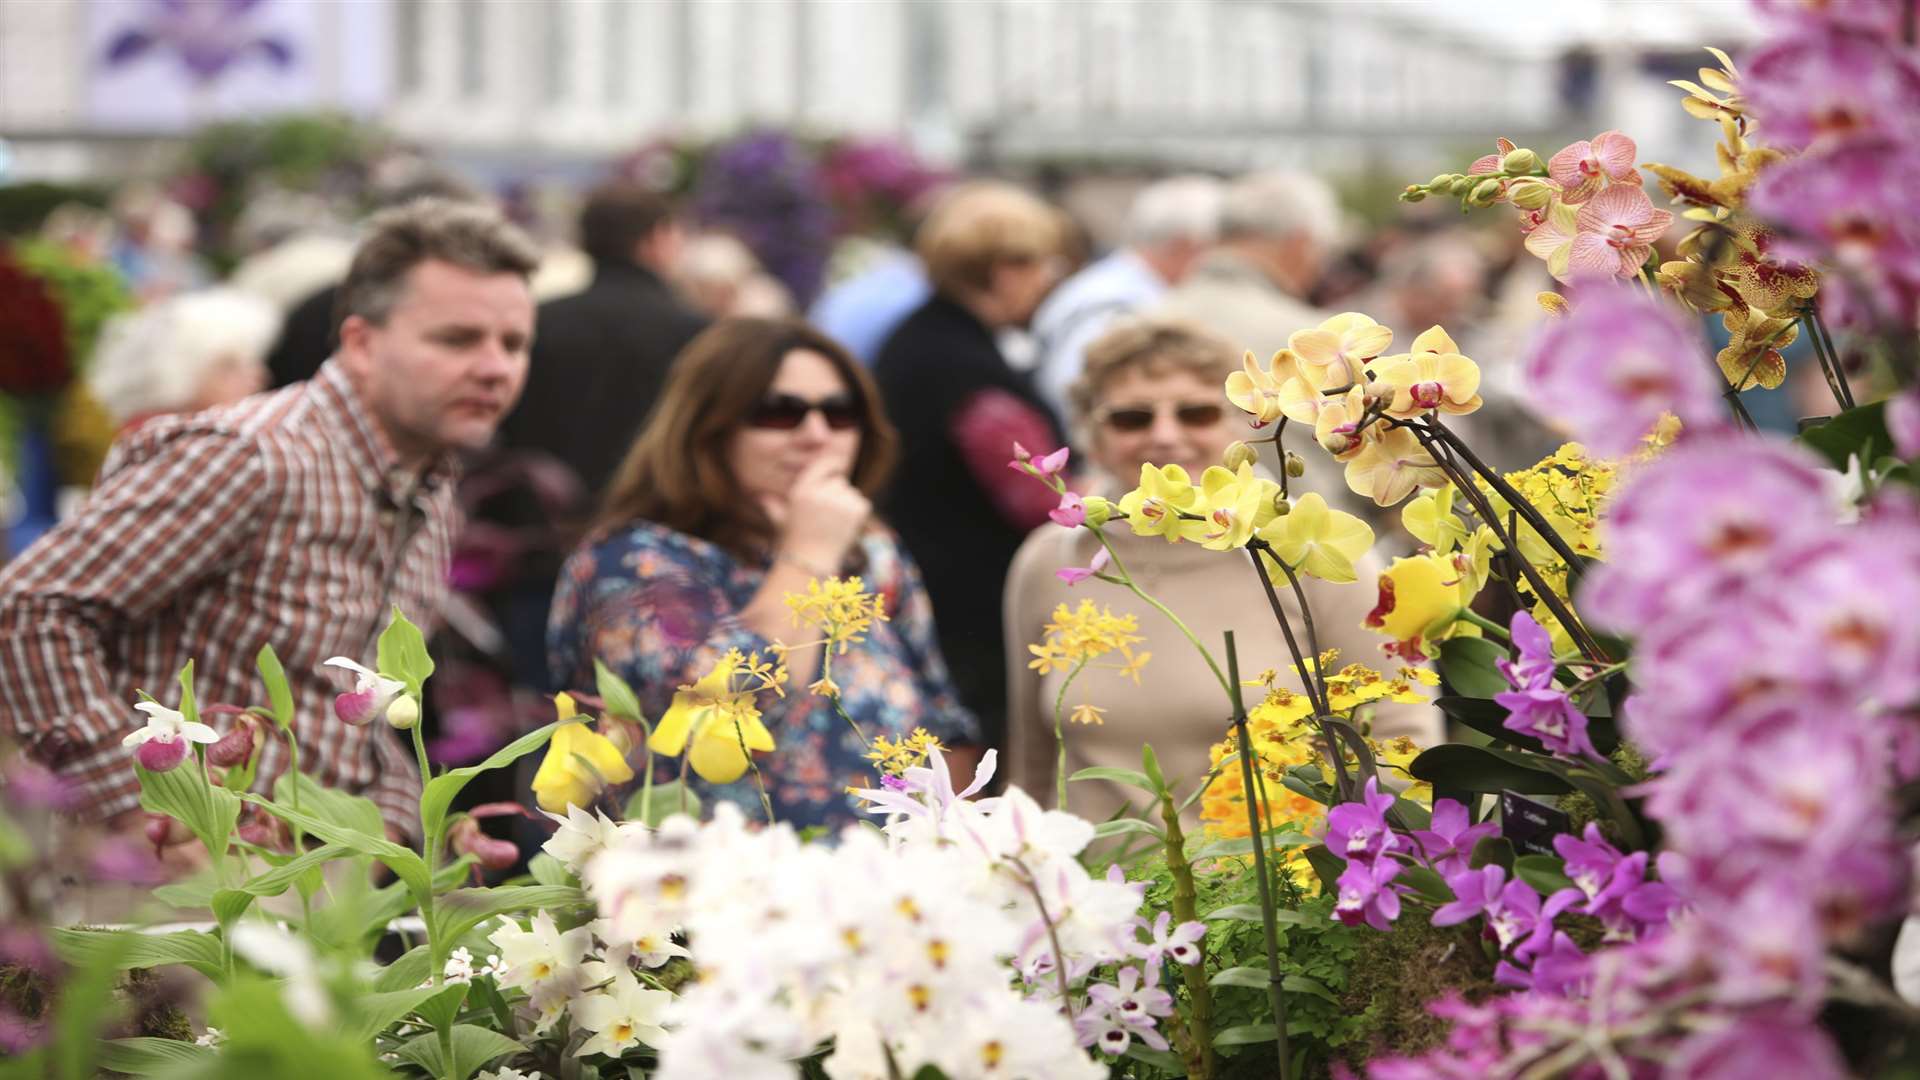 The RHS Chelsea Flower Show attracts thousands of visitors every year